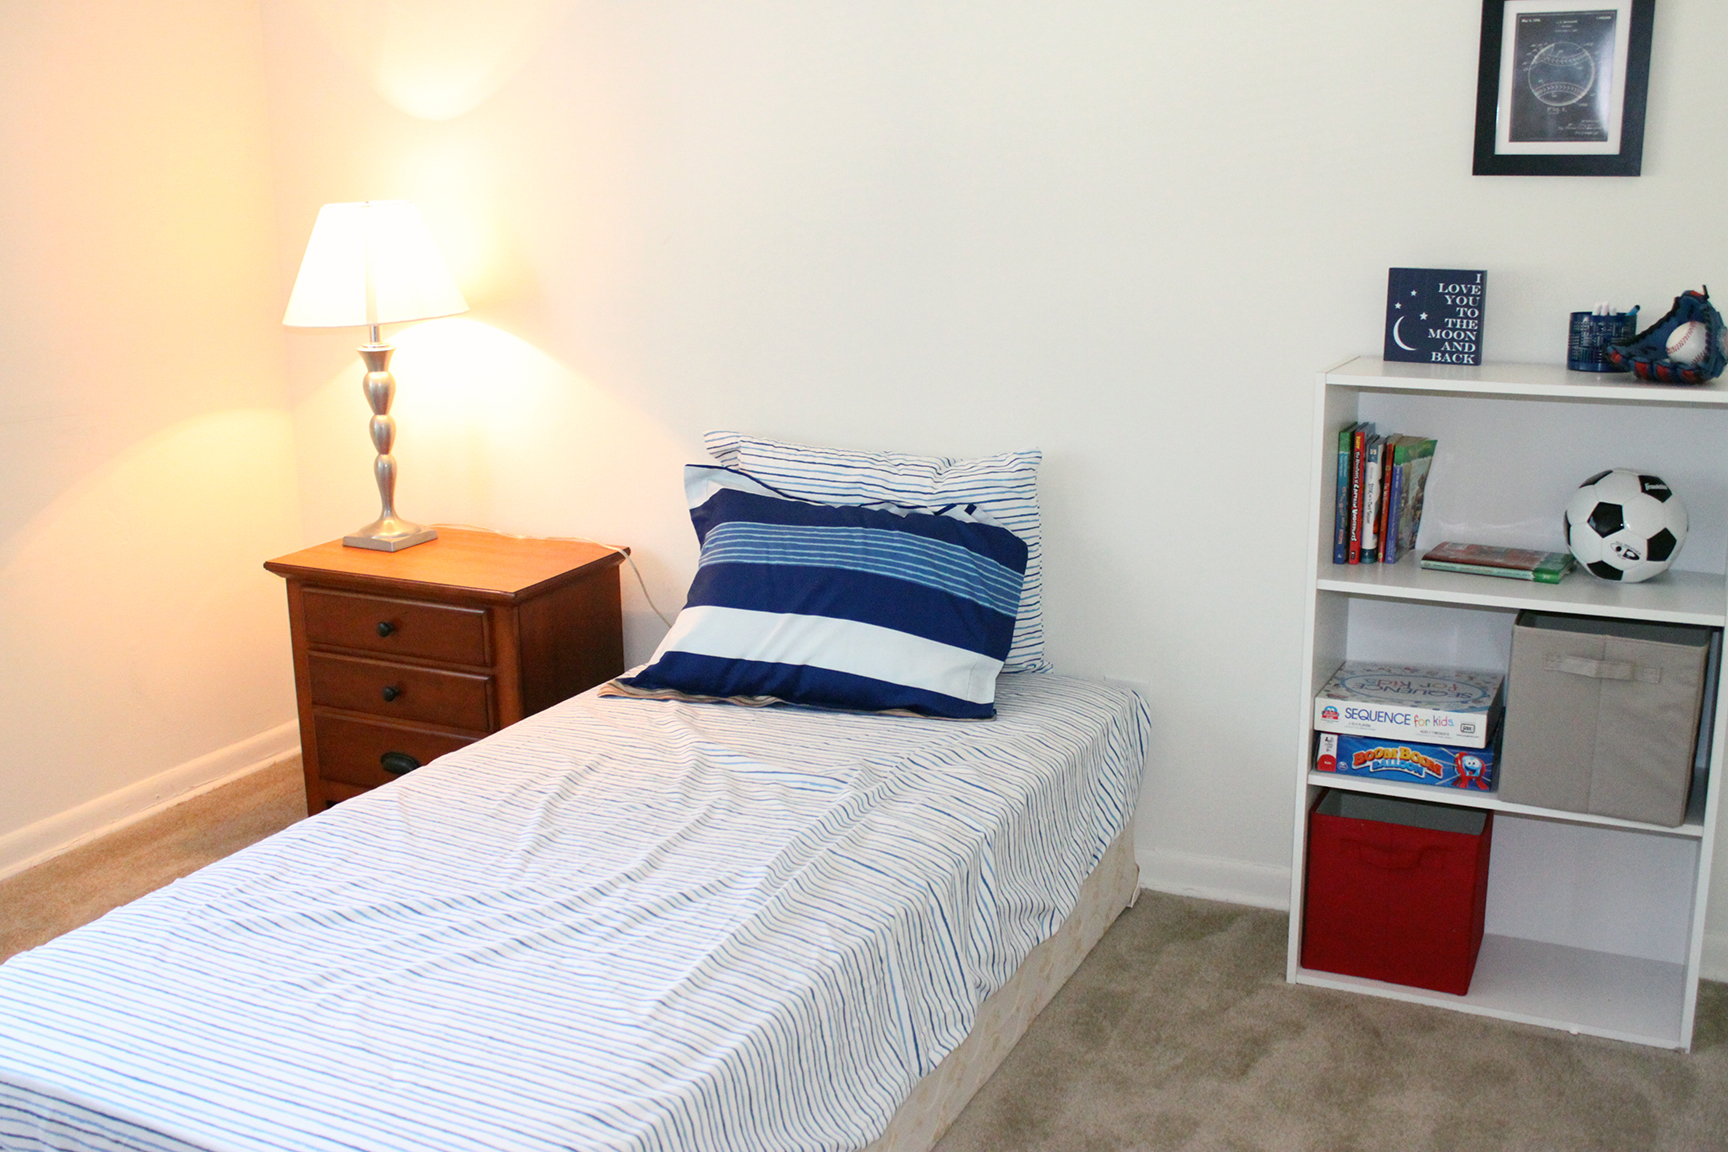 Bedroom area of an apartment, fitted with a twin size bed, carpet flooring, and a night stand